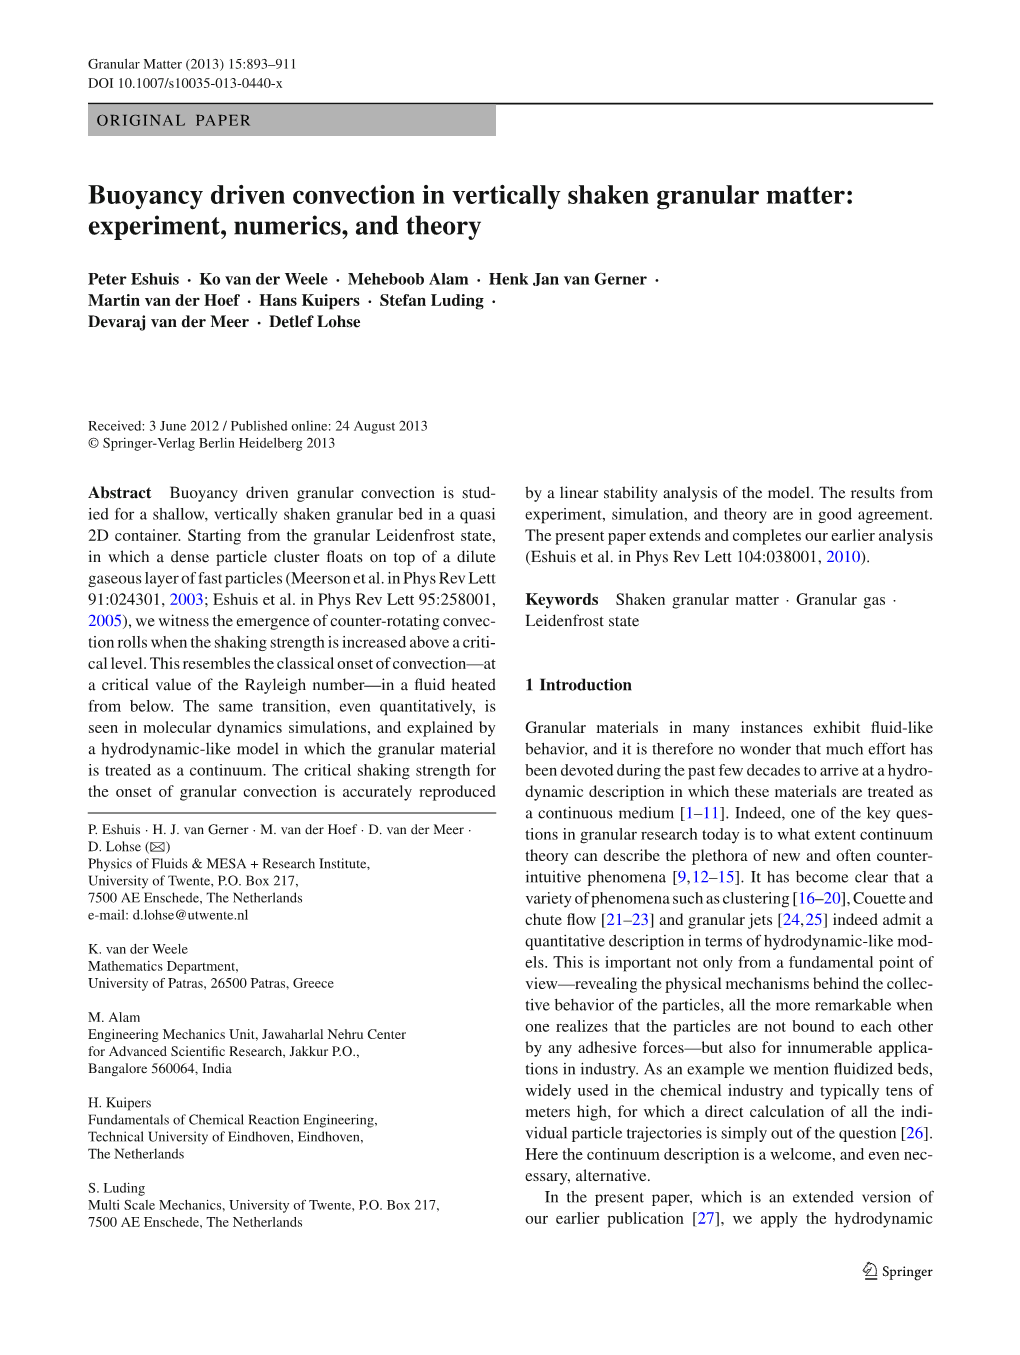 Buoyancy Driven Convection in Vertically Shaken Granular Matter: Experiment, Numerics, and Theory